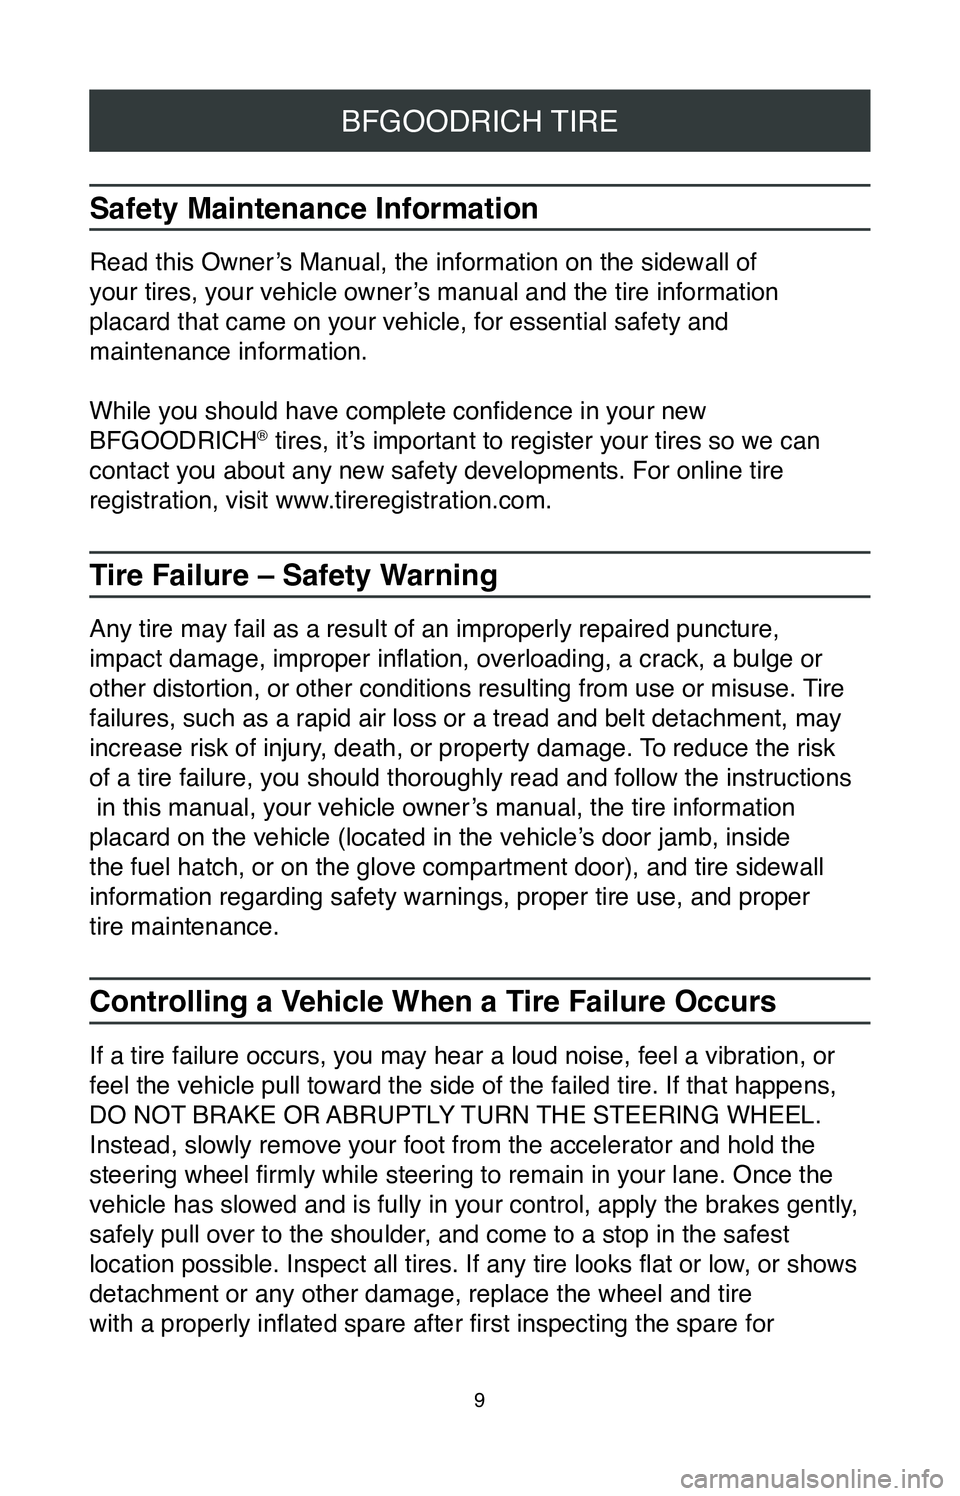 TOYOTA GT86 2020  Warranties & Maintenance Guides (in English) 9
BFGOODRICH TIRE
Safety Maintenance Information
Read this Owner’s Manual, the information on the sidewall of  
your tires, your vehicle owner’s manual and the tire information   
placard that cam